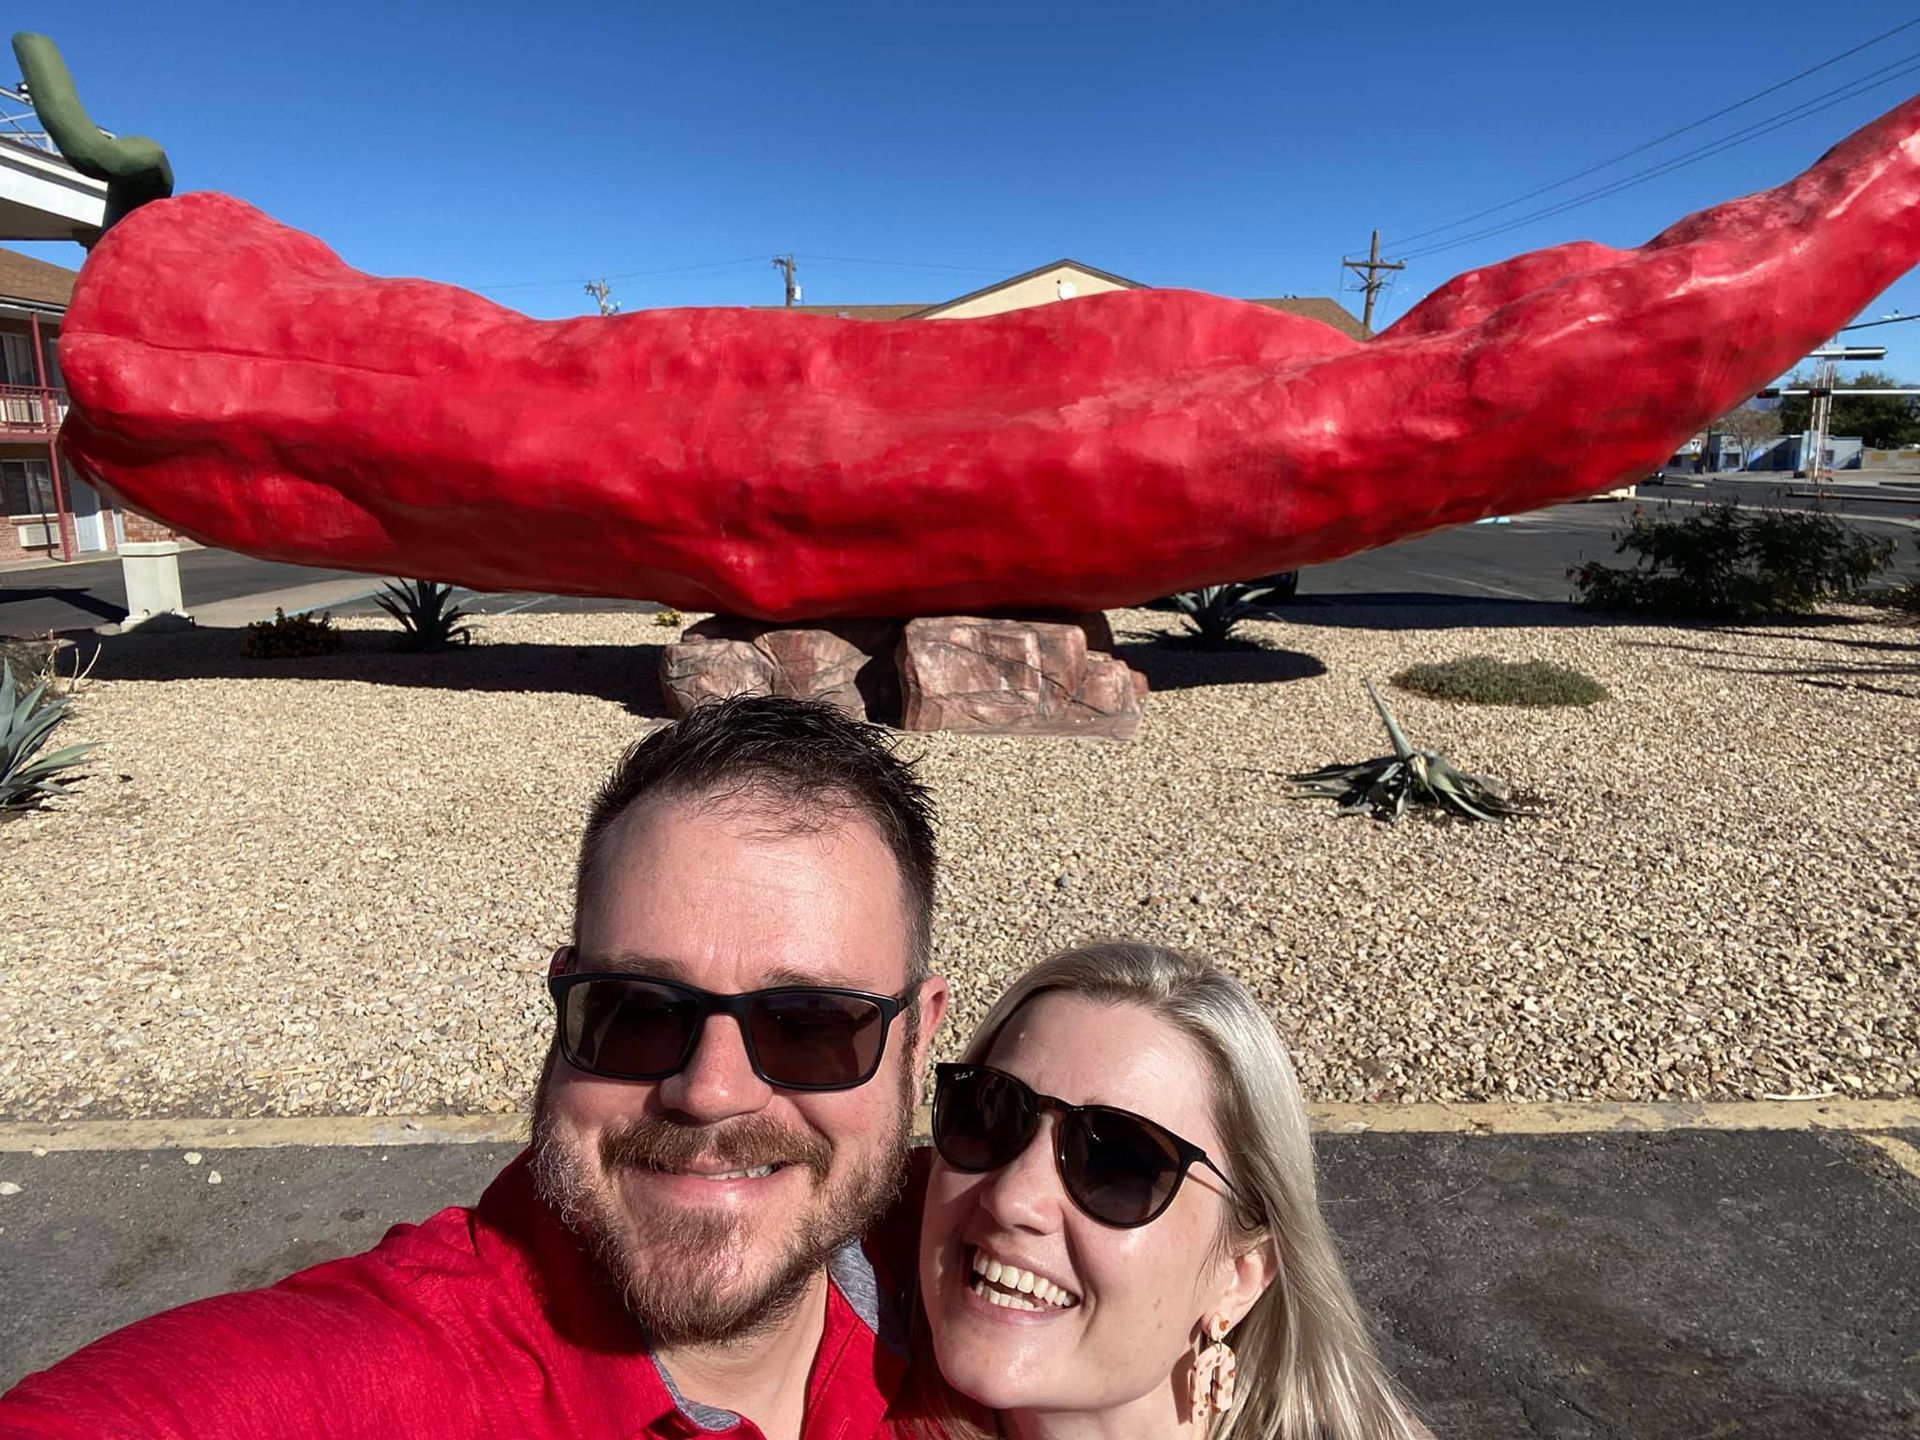 World’s Largest Chile Pepper Sculpture, world file in Las Cruces, New Mexico